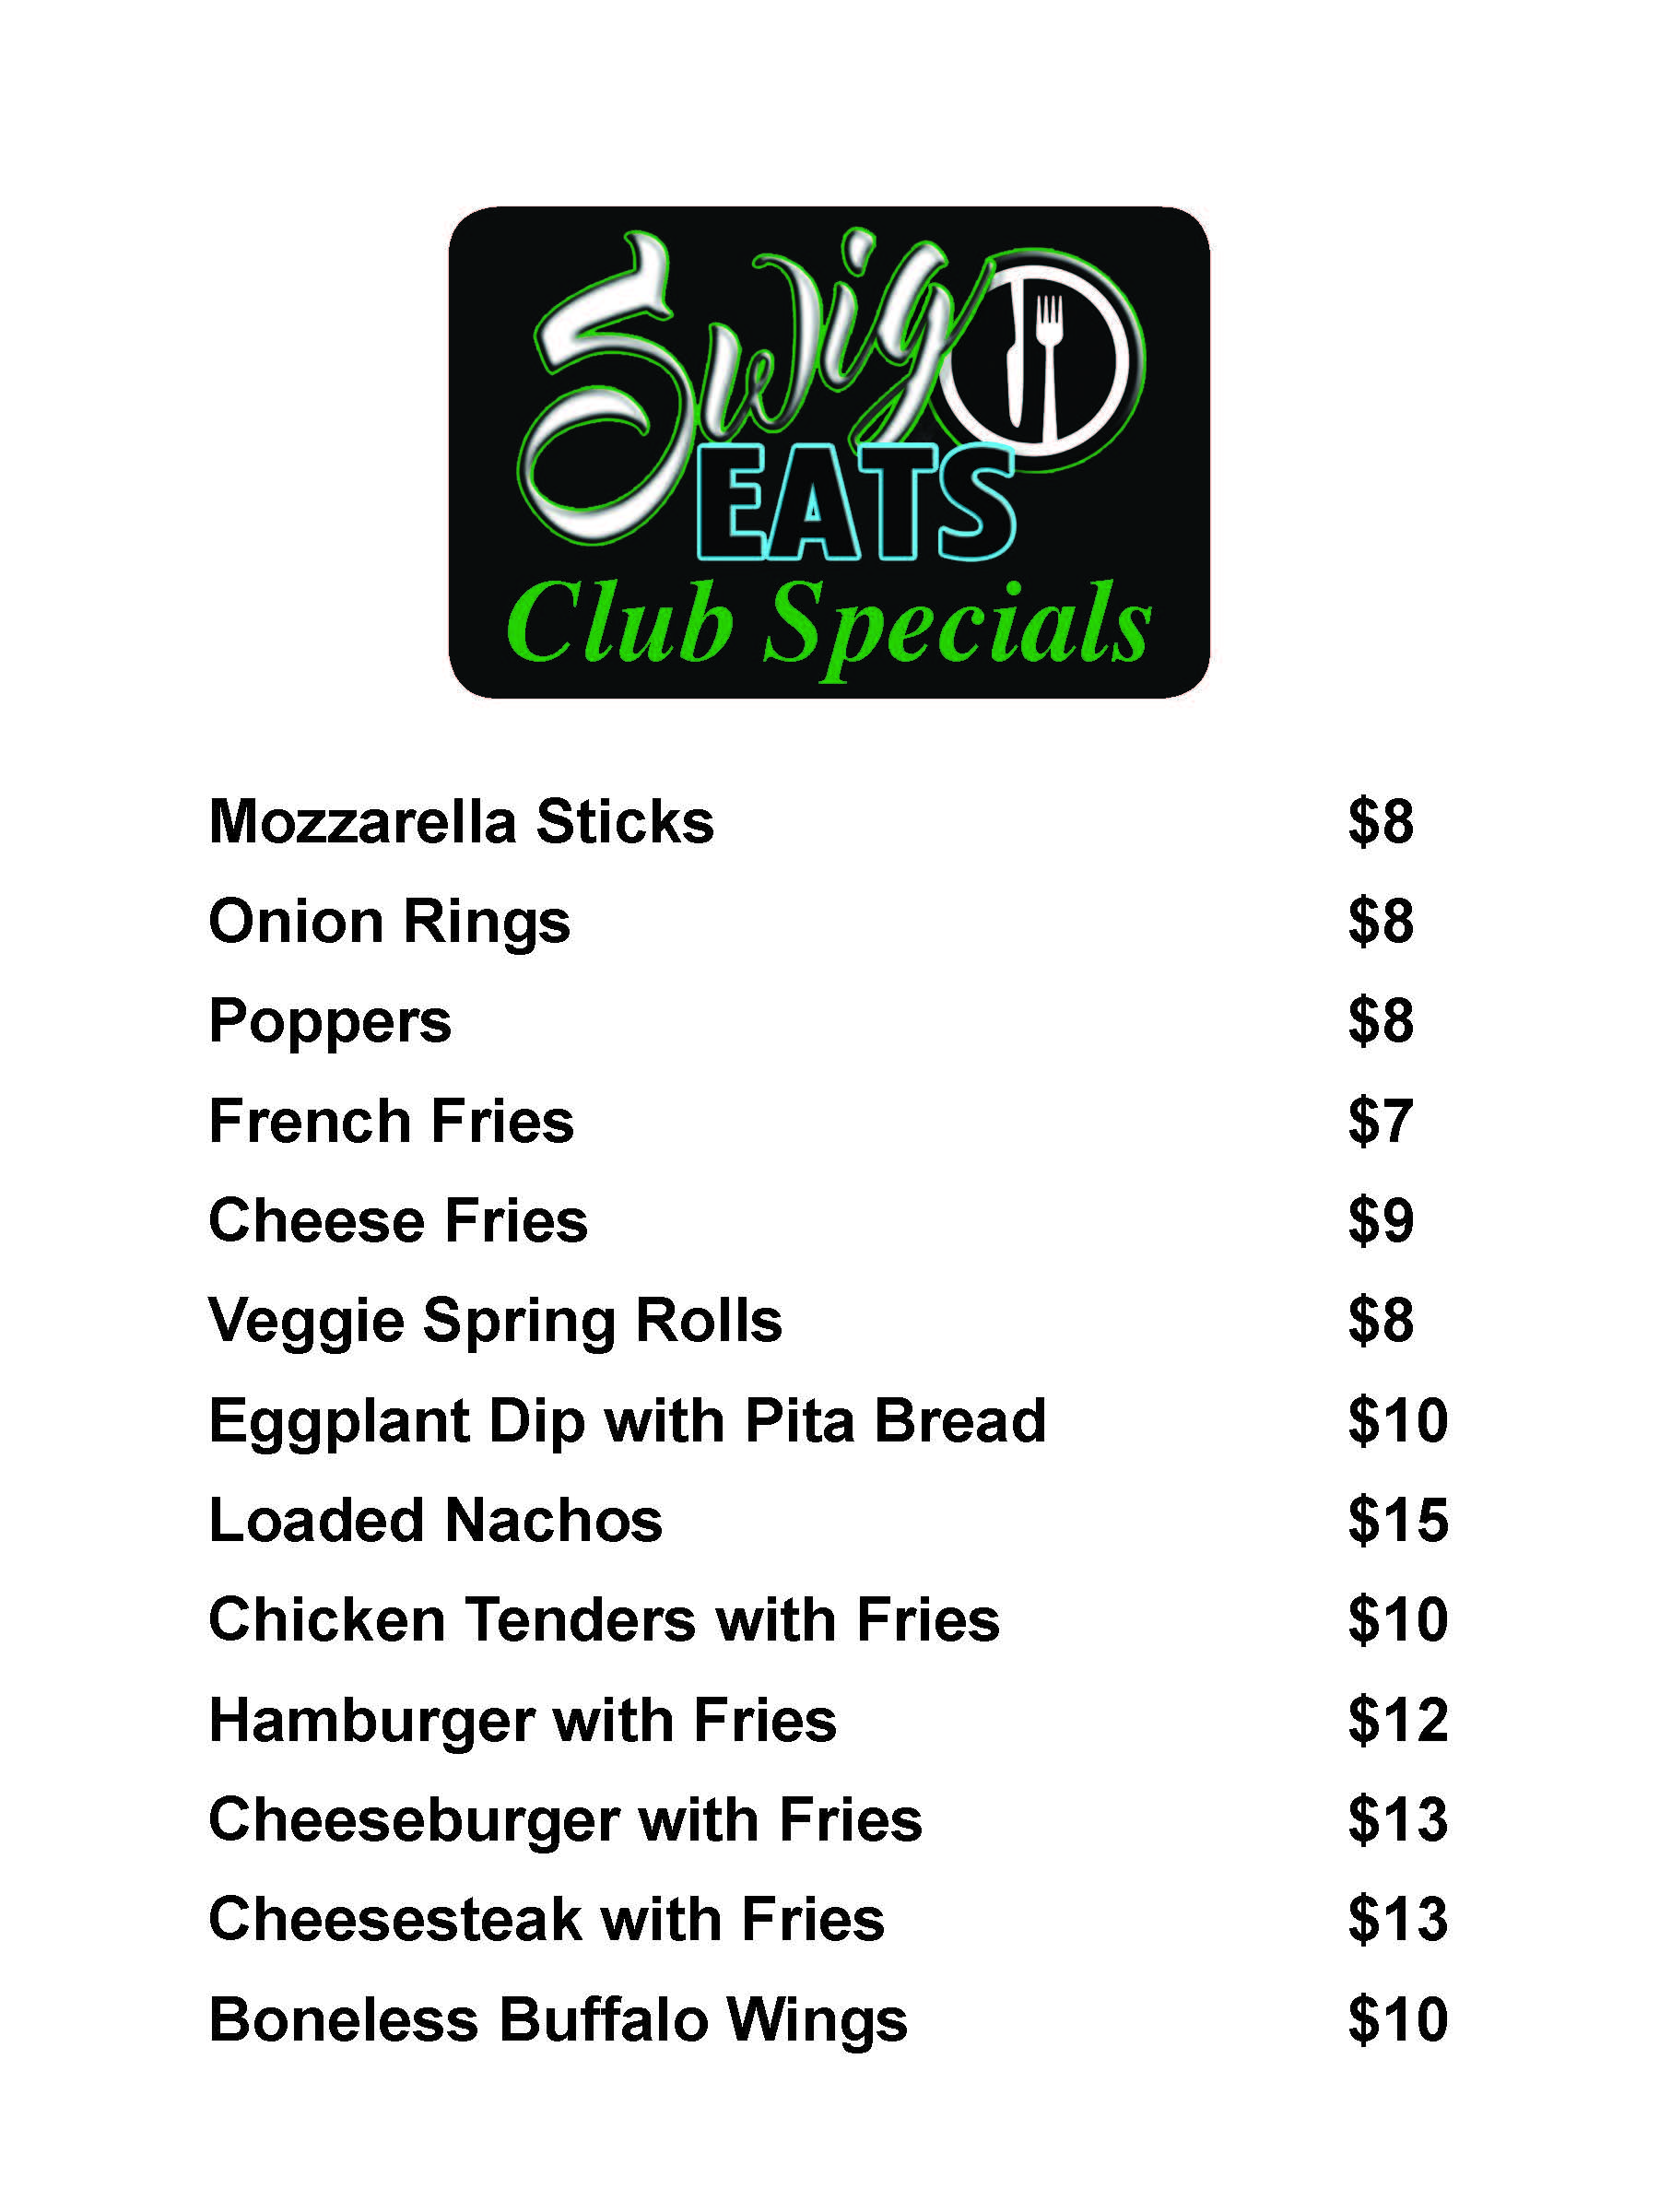 Swig Eats Club Specials menu featuring items such as Mozzarella Sticks, Onion Rings, French Fries, Cheese Fries, Veggie Spring Rolls, and more, with prices ranging from $7 to $15.